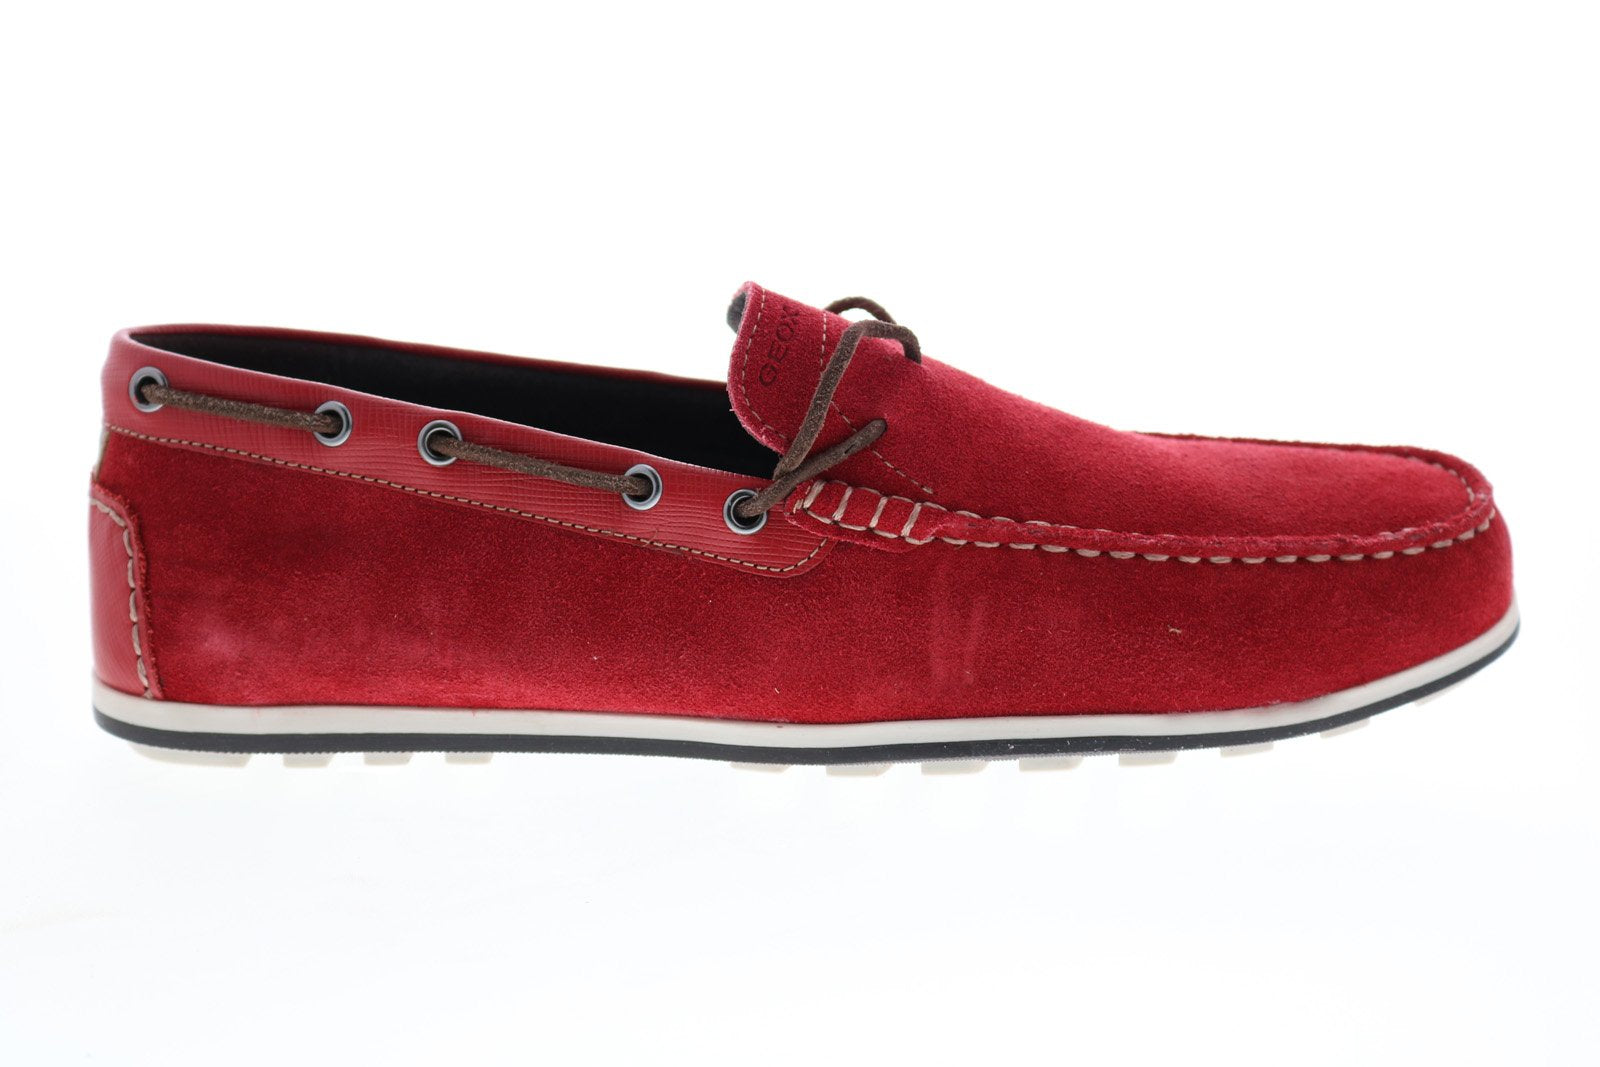 Permanecer Anzai Entender Geox U Mirvin U824LB02247C7000 Mens Red Loafers & Slip Ons Moccasin Shoes  10.5 - Ruze Shoes